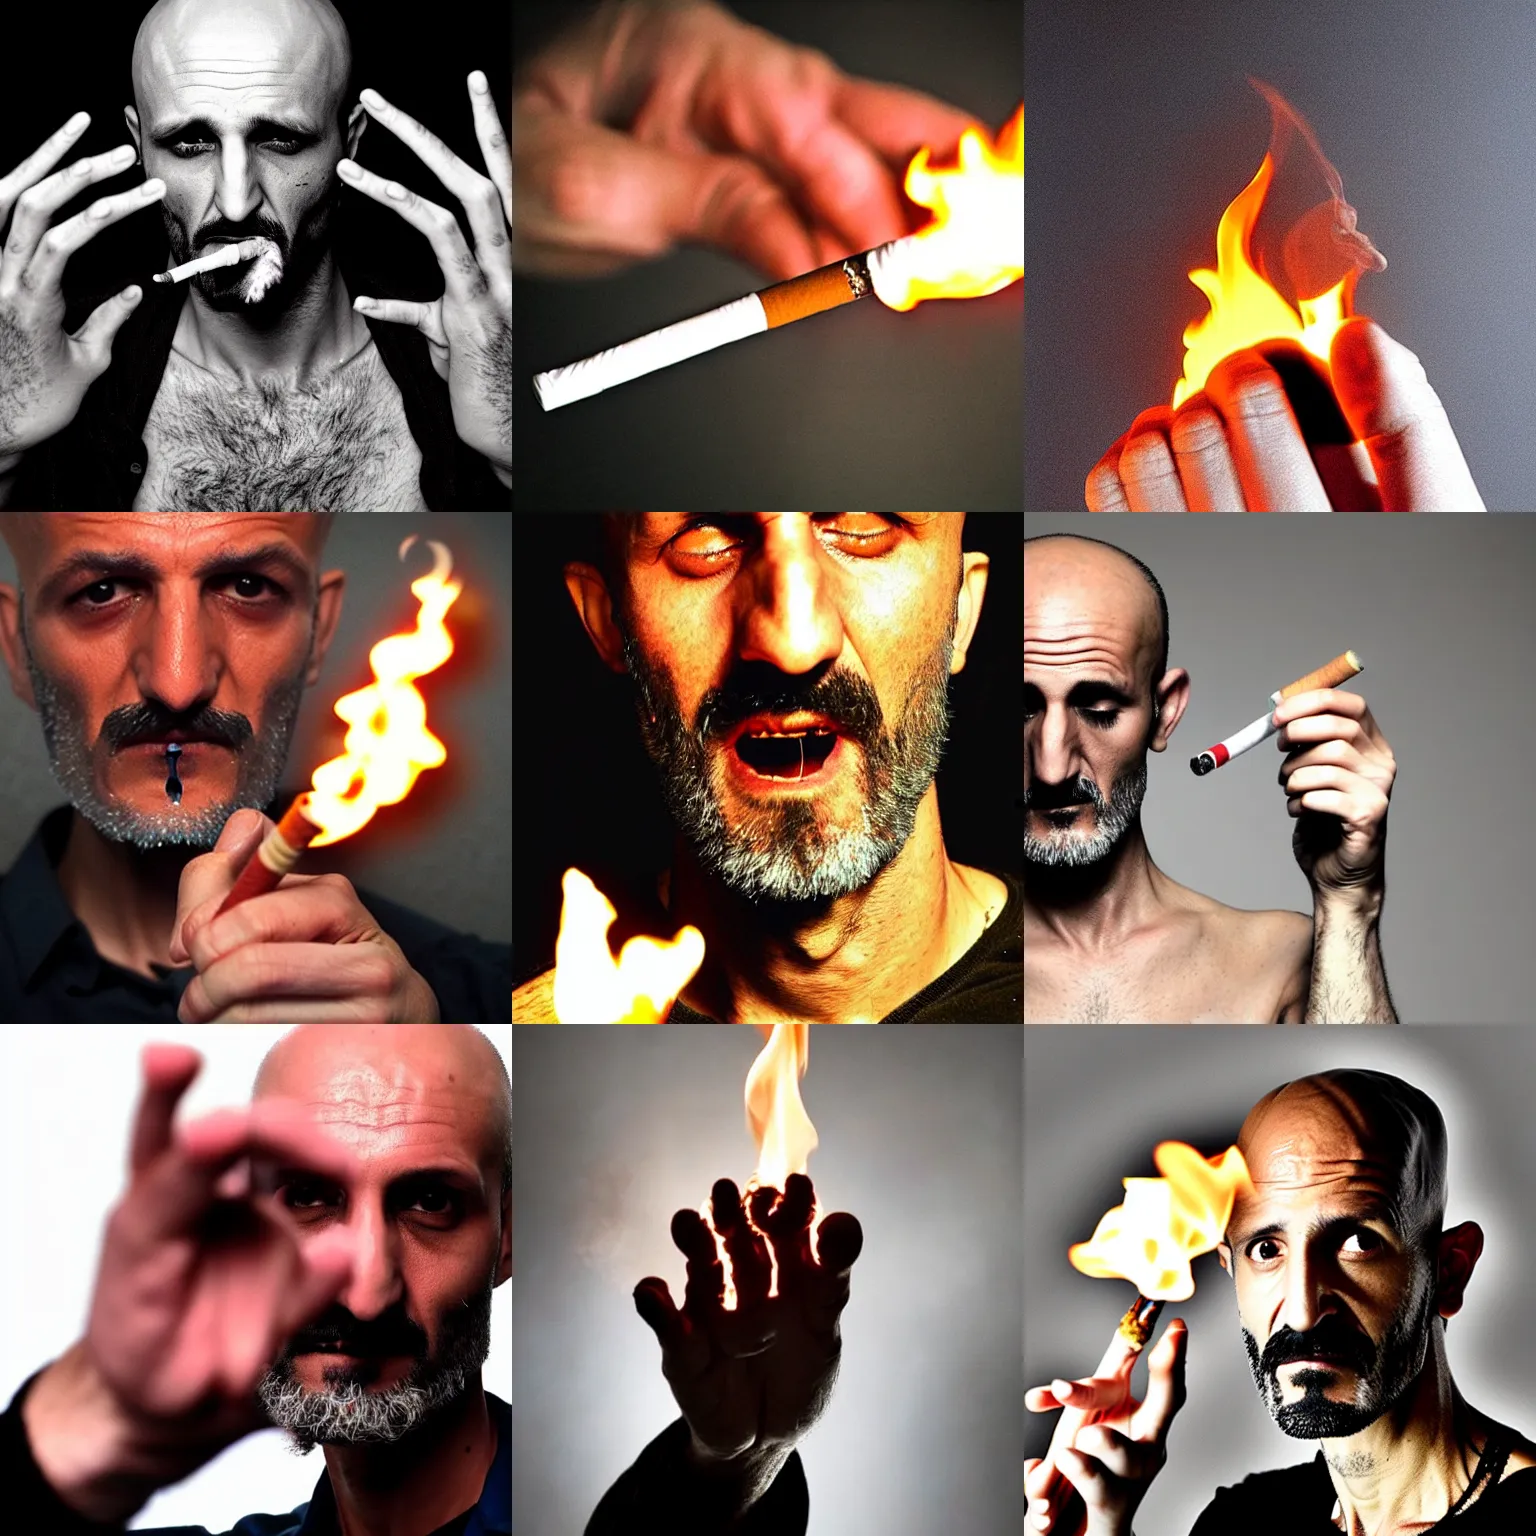 Prompt: Omar Reda, Tim Booth, very accurate photo, very coherent image, hyper realistic photo of a human hand with a burning cigarette in it, exactly 5 fingers, very detailed, award-winning shot